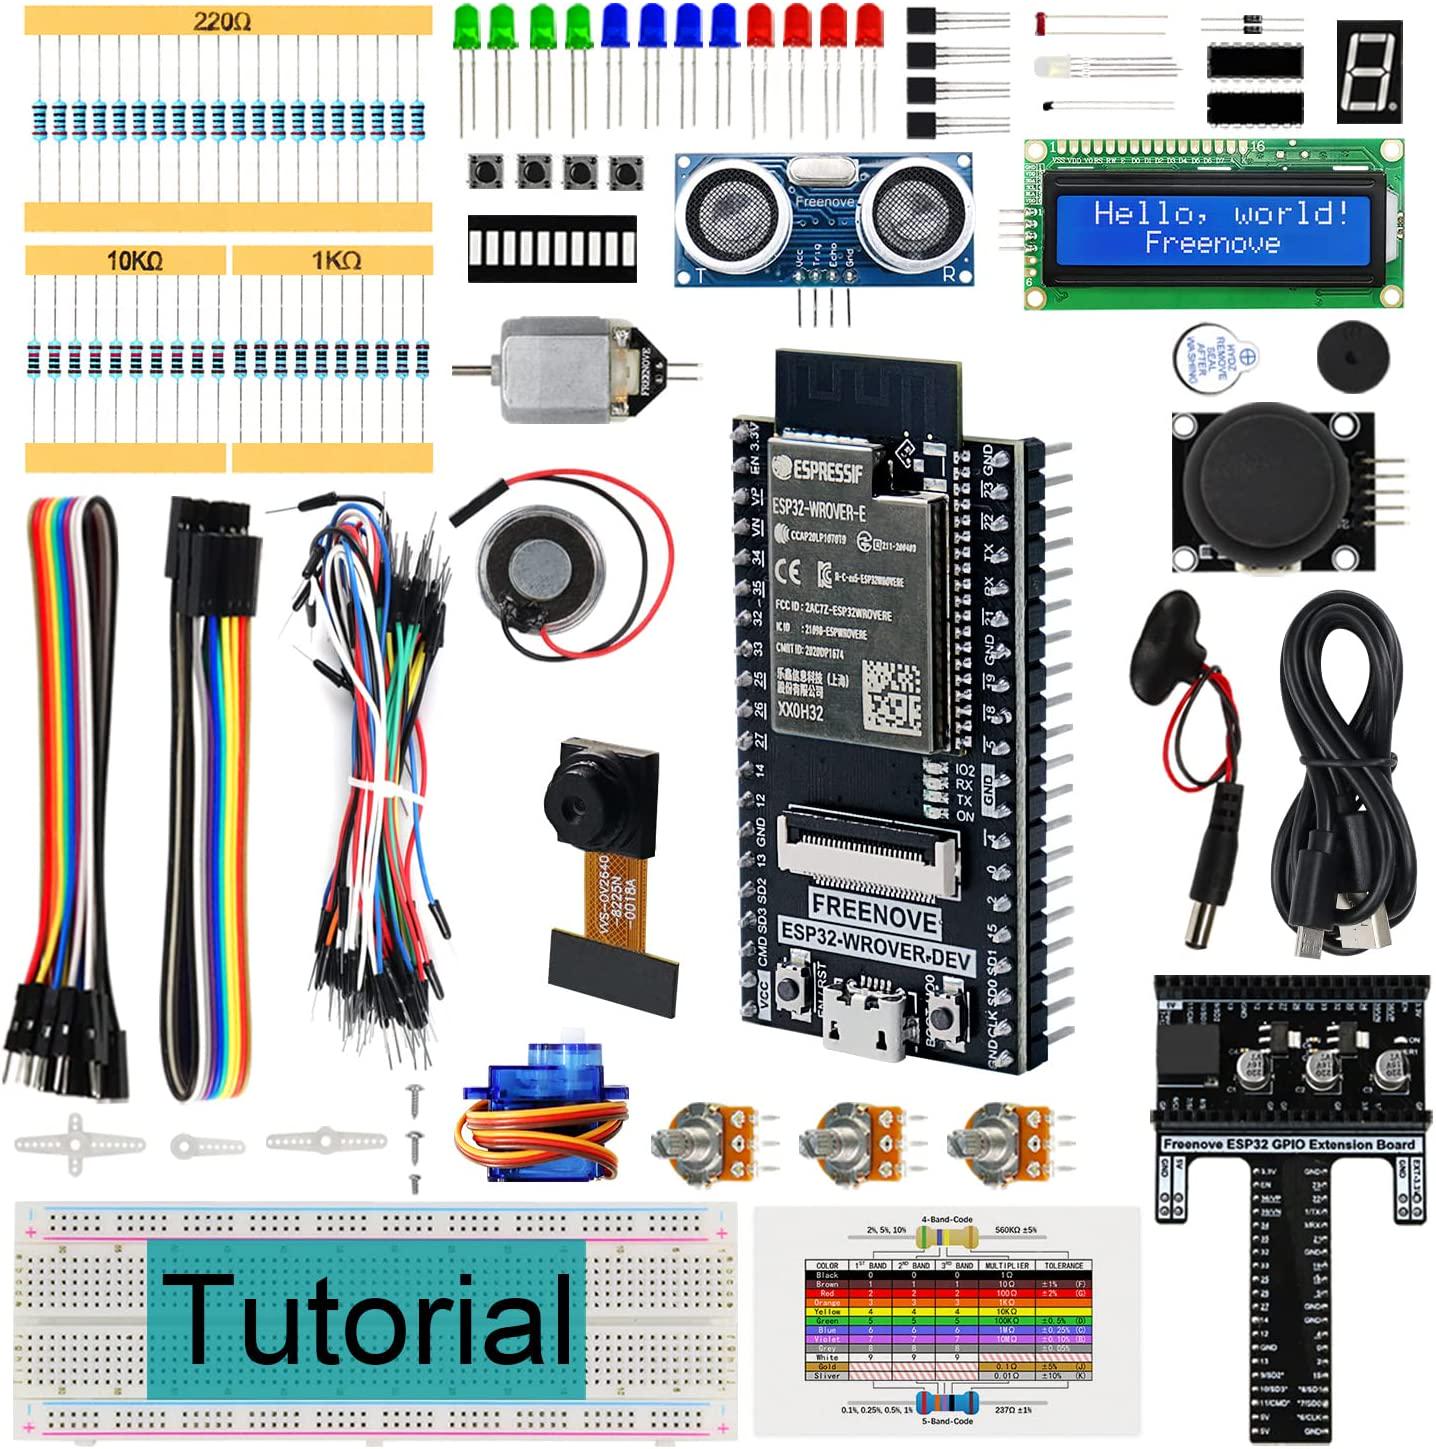 Freenove, Freenove Super Starter Kit for ESP32-WROVER (Included) (Compatible with Arduino IDE), Onboard Camera Wireless, Python C, 516-Page Detailed Tutorial, 173 Items, 81 Projects